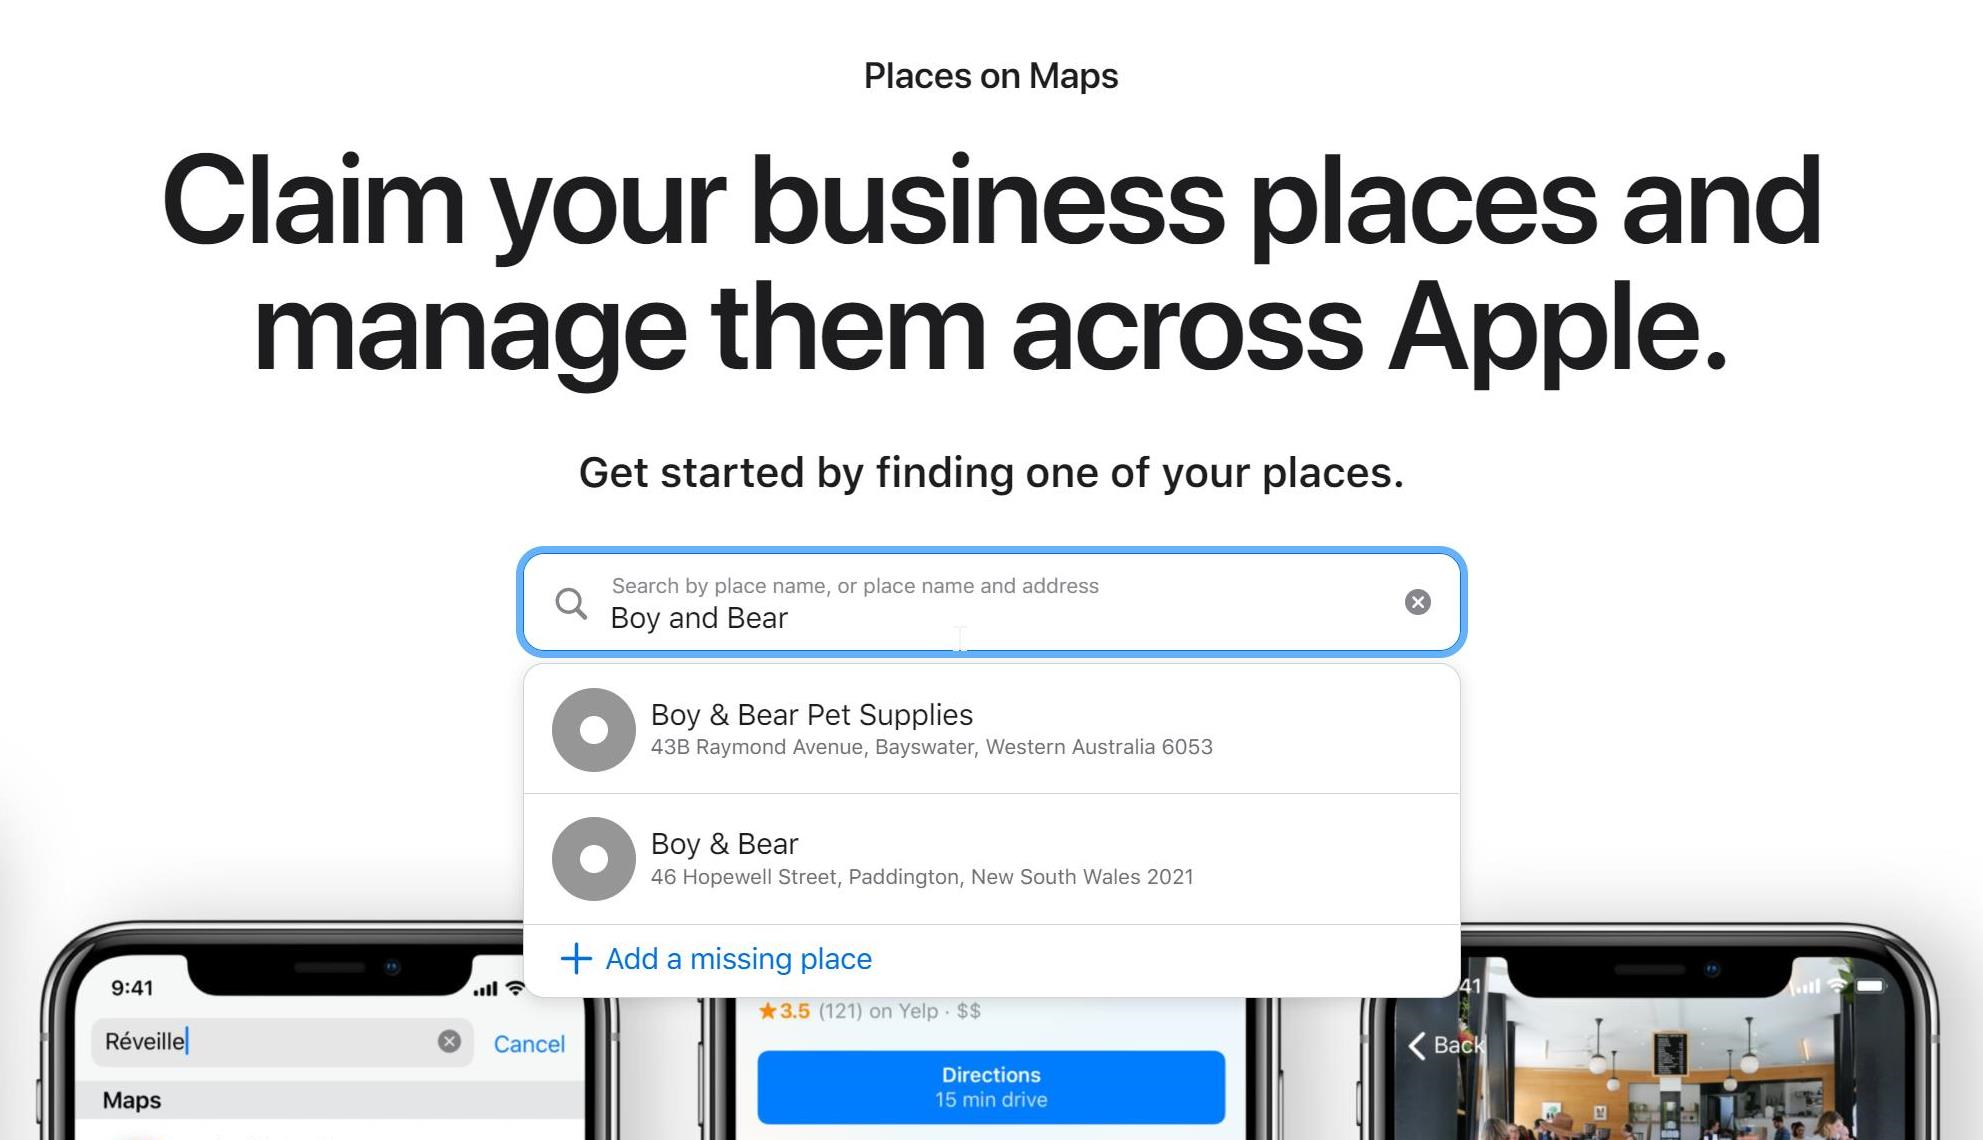 How to claim your business on Apple Maps